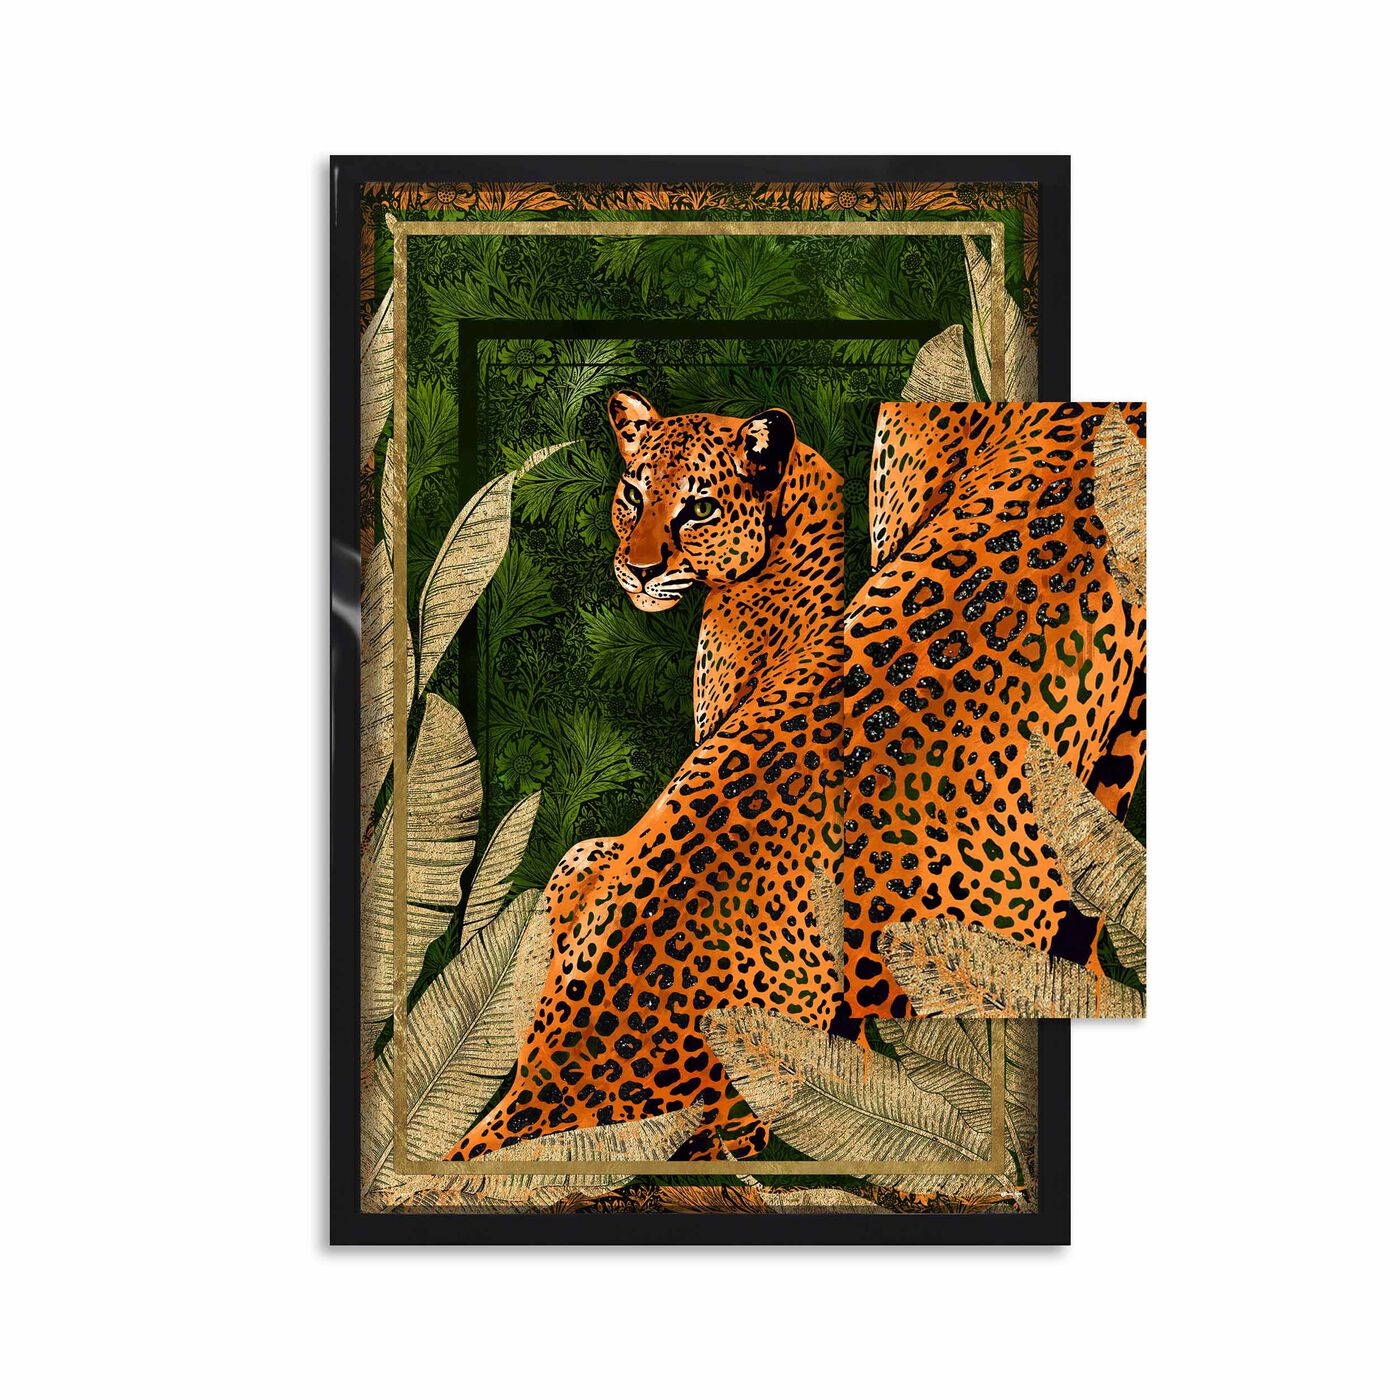 Emerald Jungle Cat - With Hand-Applied Gold Leaf and Glitter